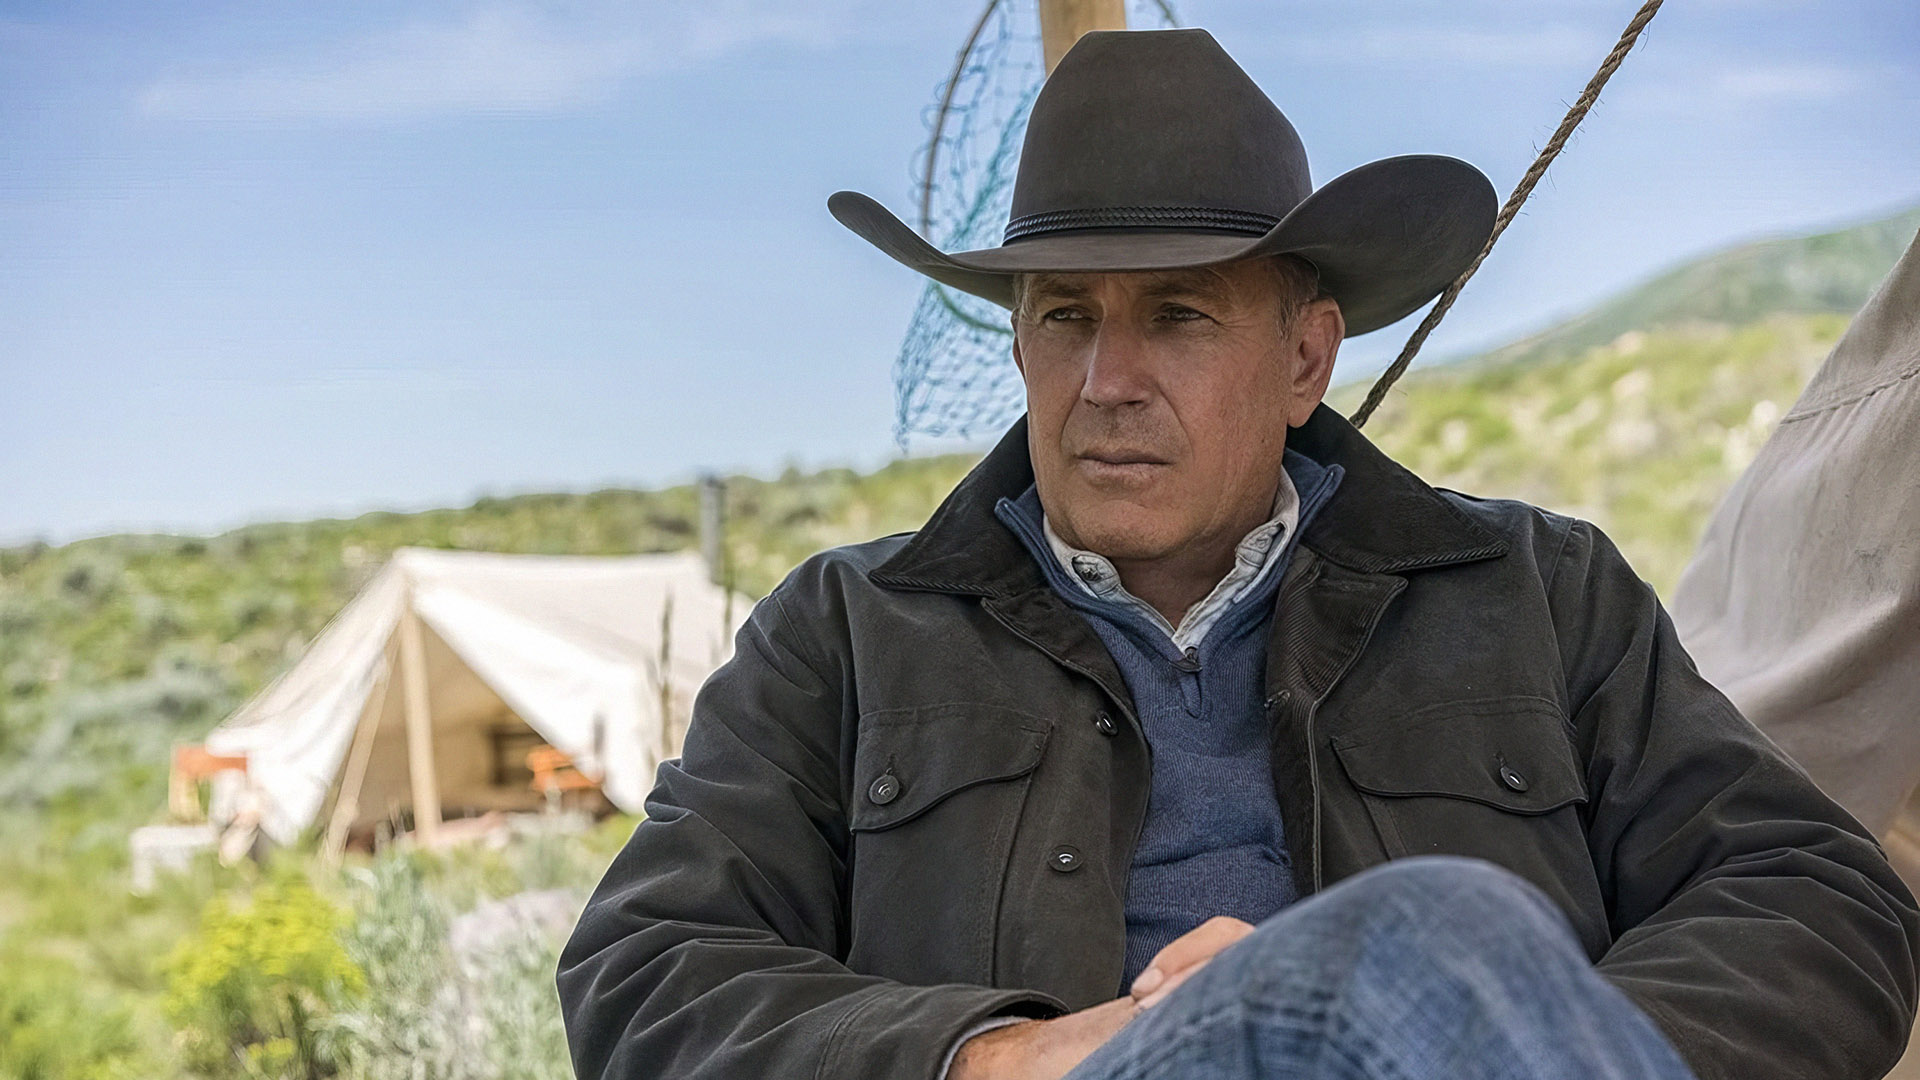 Costner Cut Ties With Yellowstone, But Keeps Up 'Will They, Won't They' Charade For Some Reason